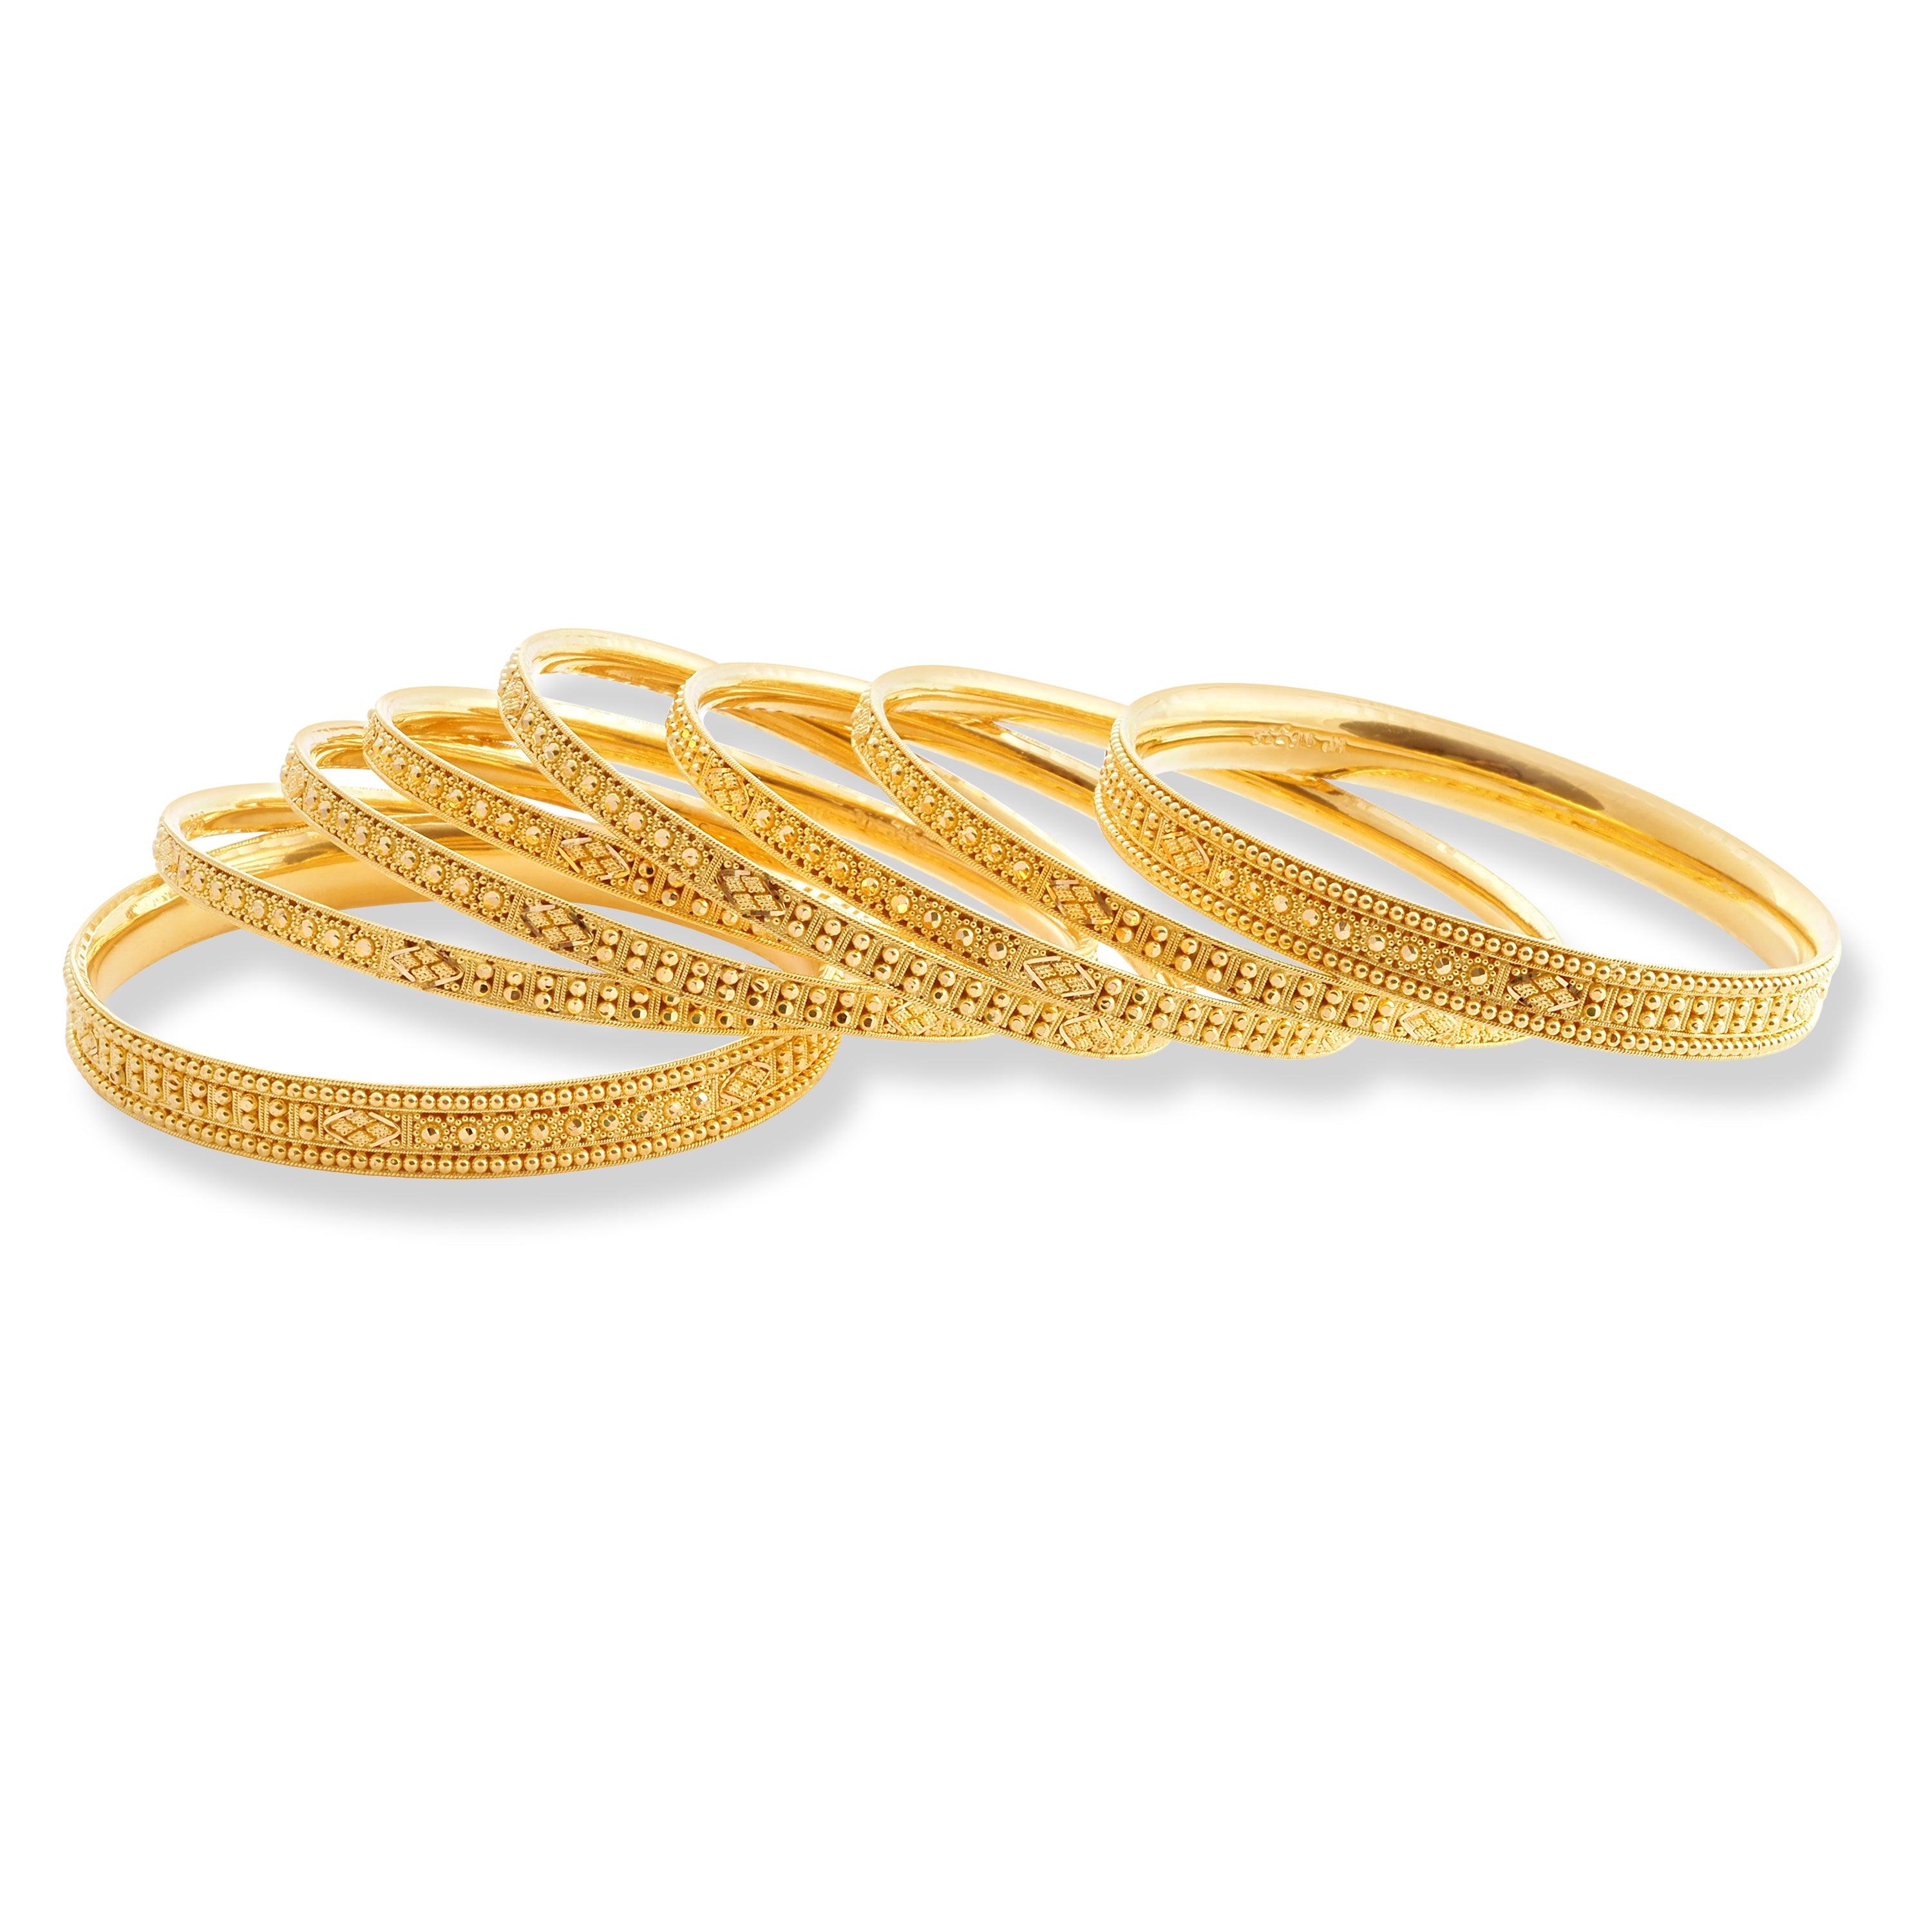 Set of Eight 22ct Gold Bangles with Diamond Cut Design and Filigree Work B-8576 - Minar Jewellers